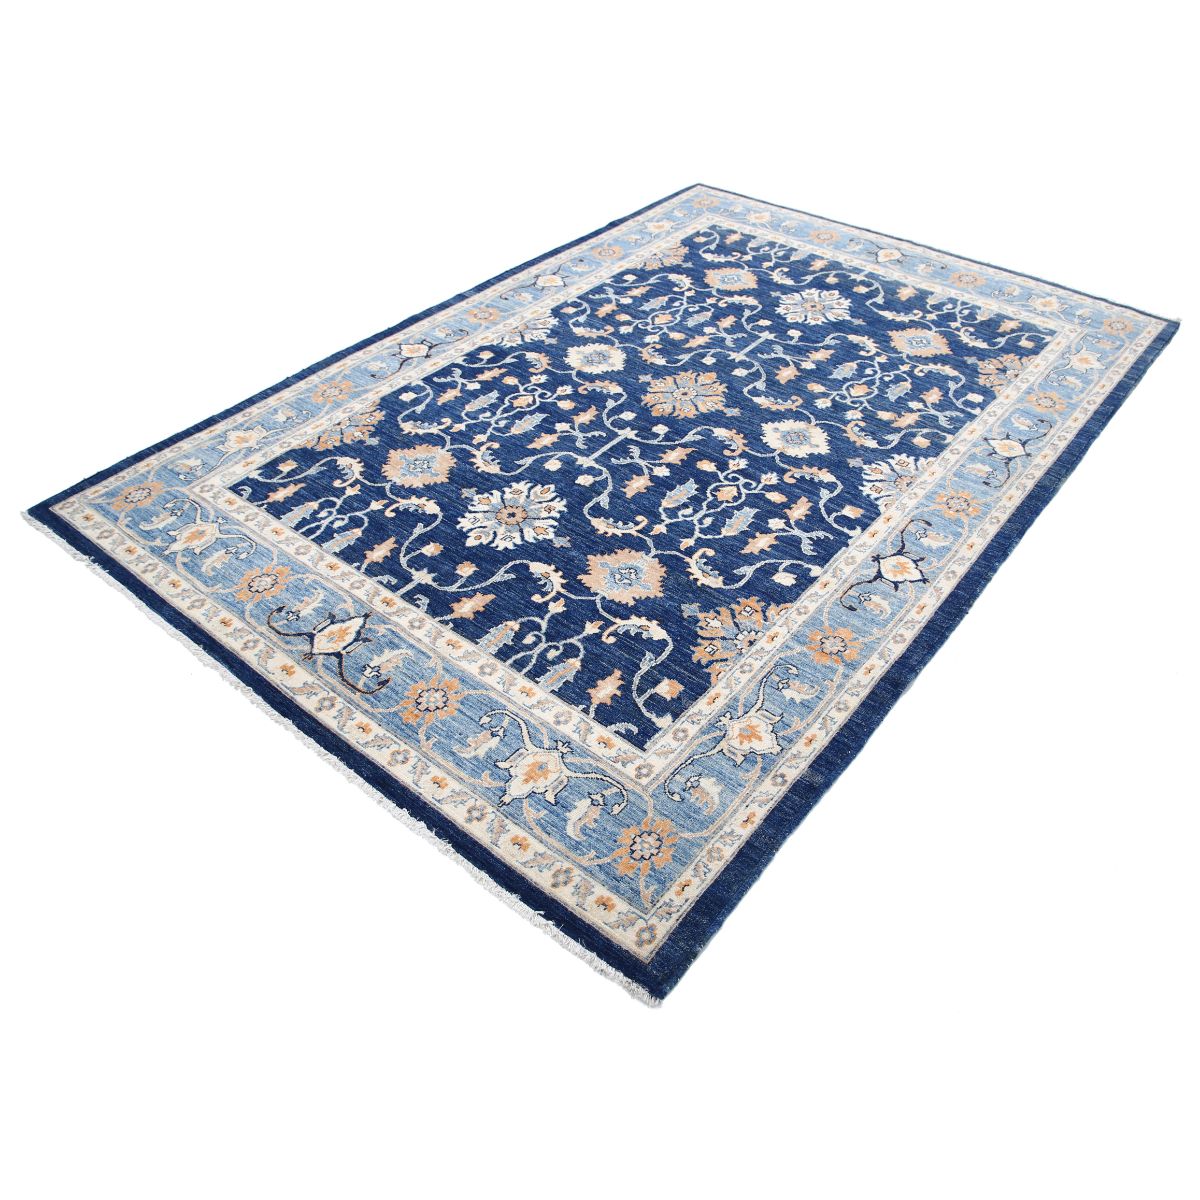 Ziegler 5'11" X 8'9" Wool Hand-Knotted Rug